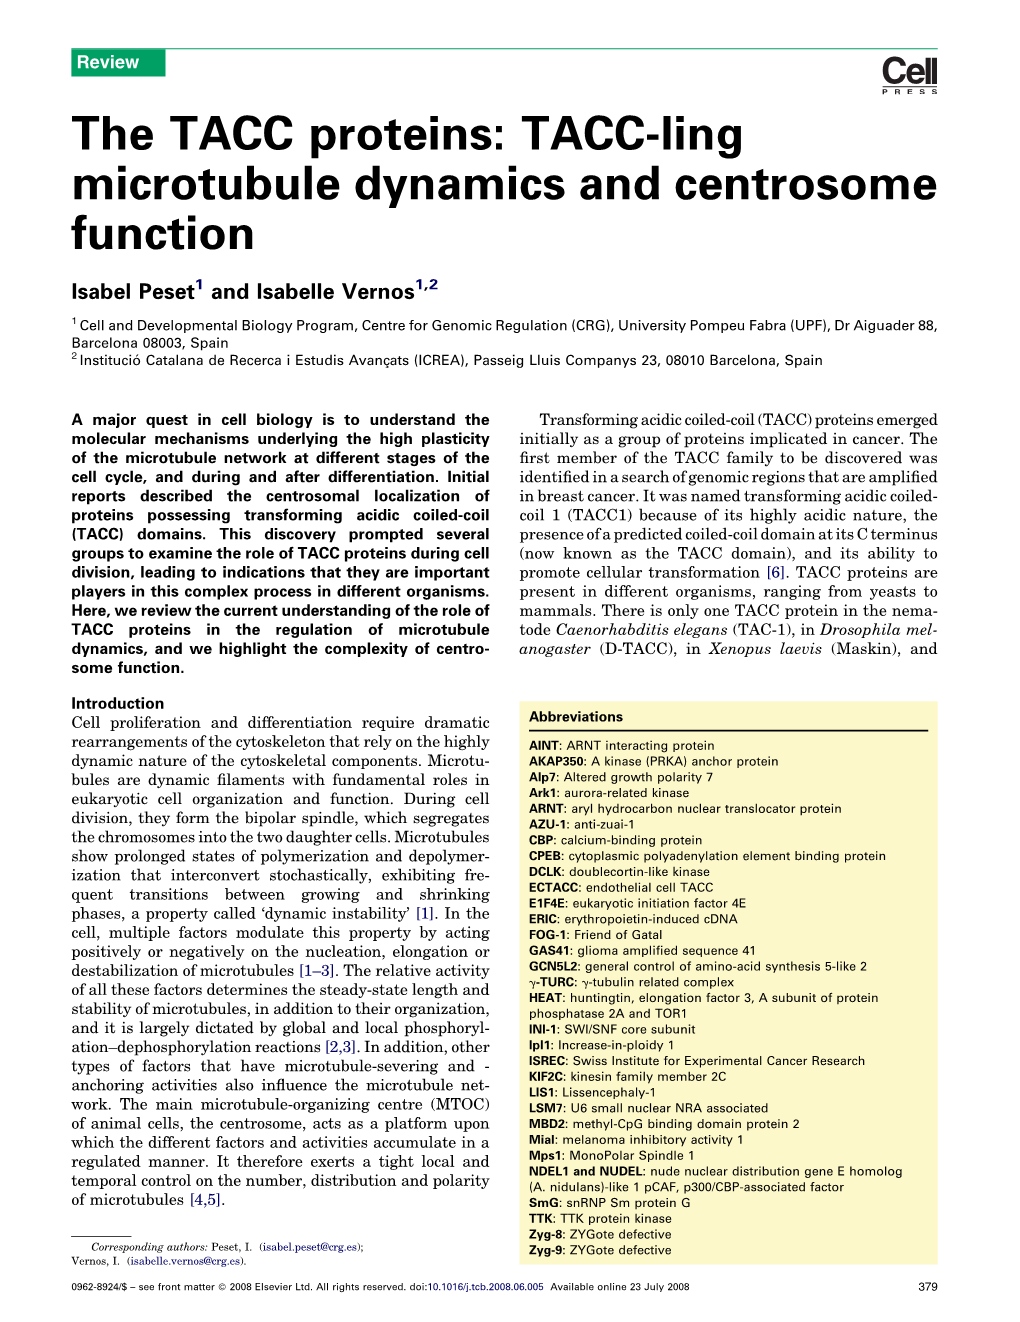 TACC-Ling Microtubule Dynamics and Centrosome Function